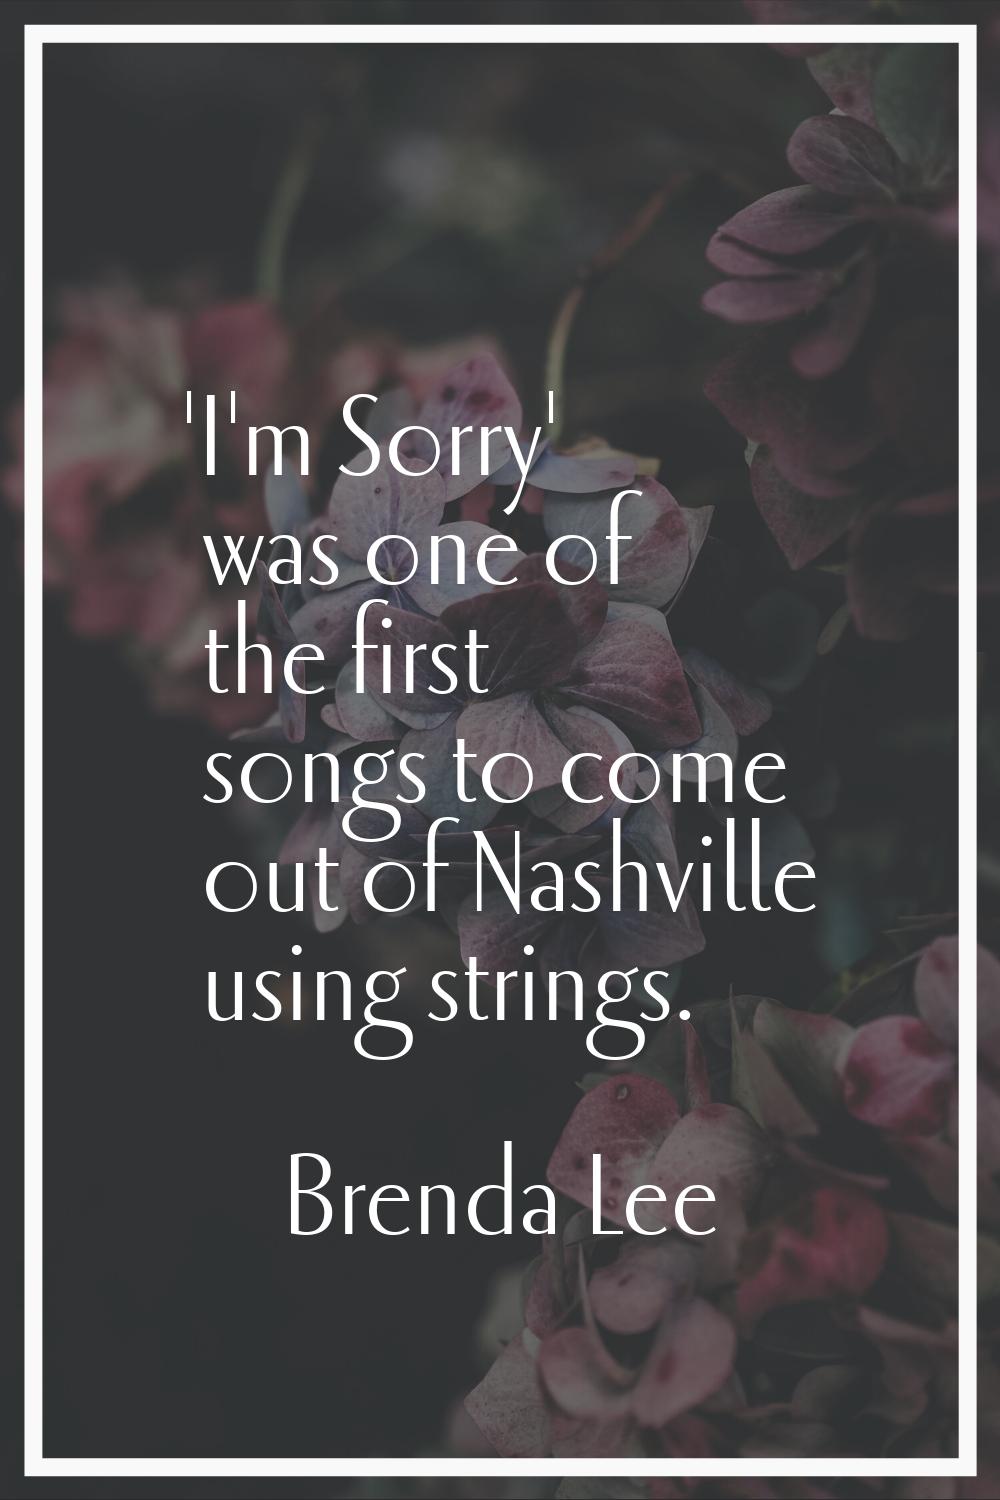 'I'm Sorry' was one of the first songs to come out of Nashville using strings.